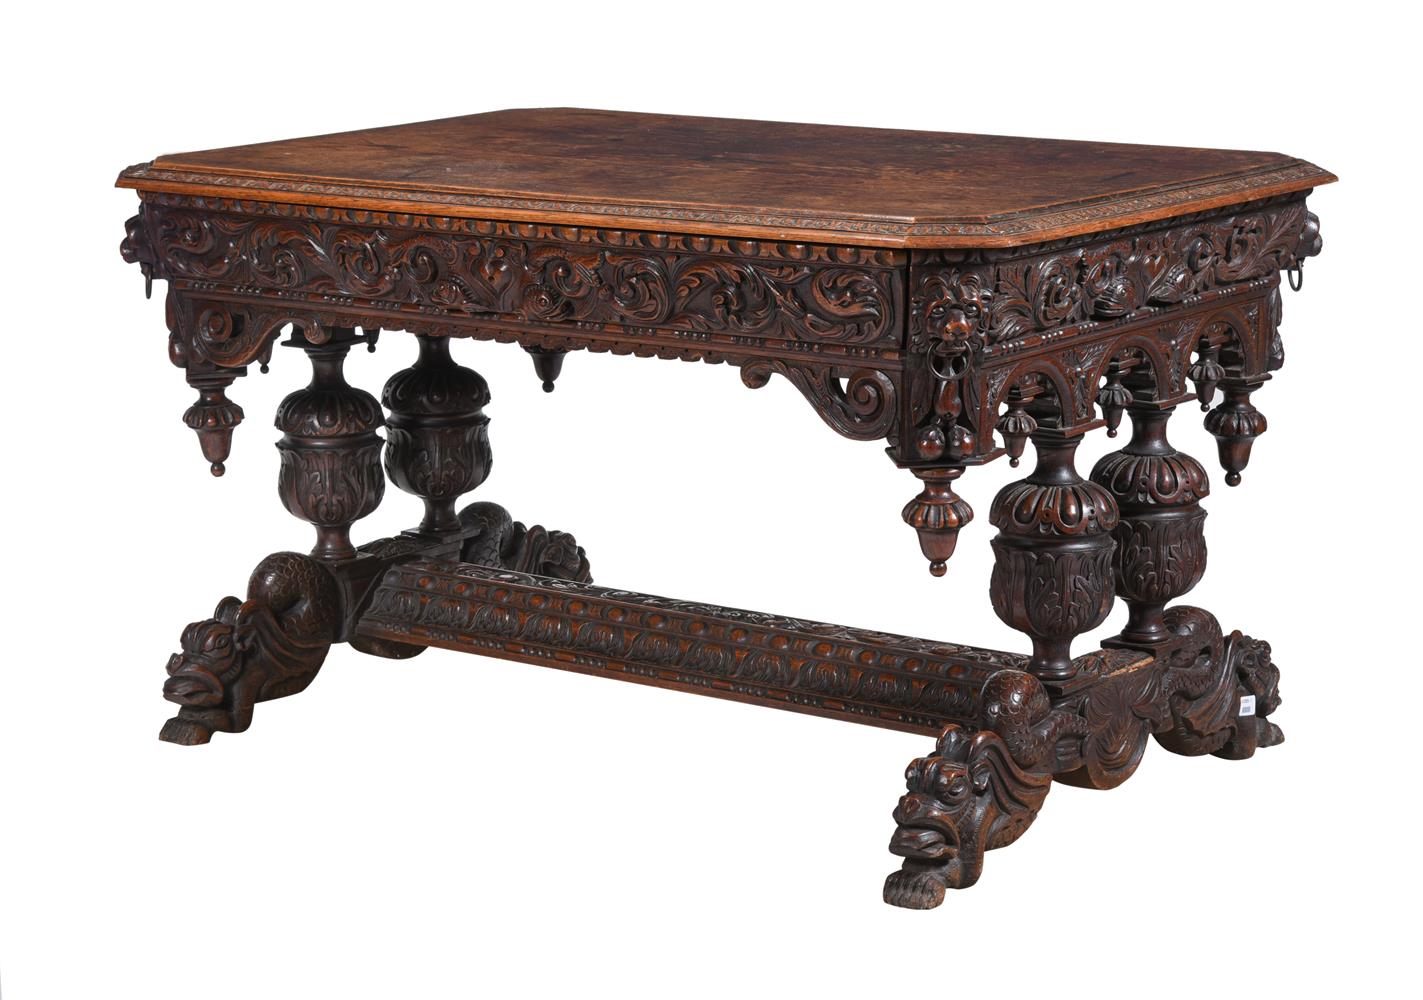 A VICTORIAN CARVED OAK CENTRE TABLE, SECOND HALF 19TH CENTURY